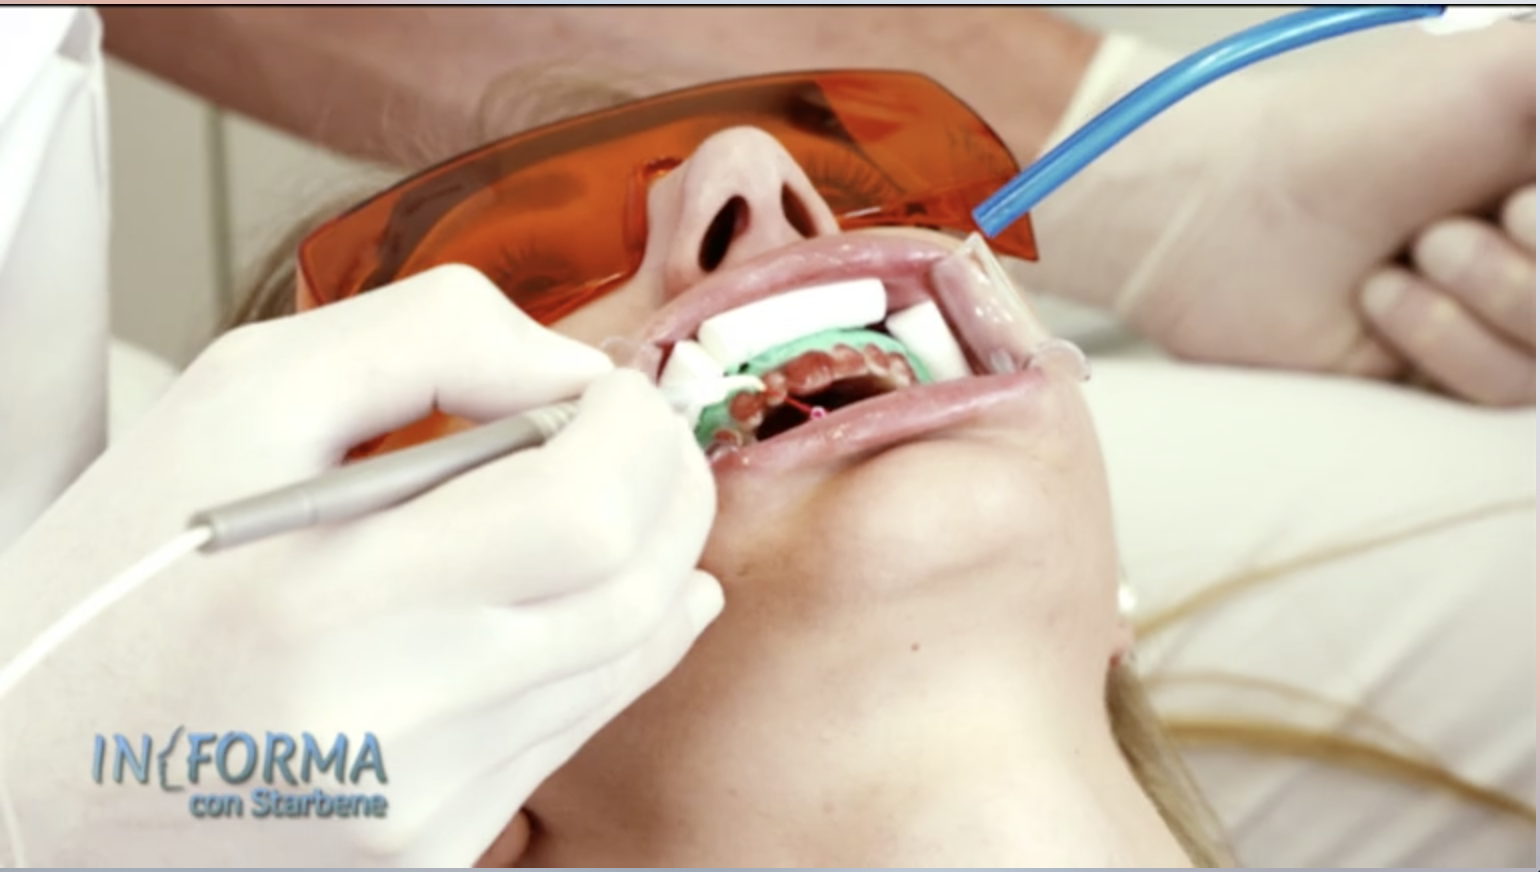 Canale 5 – In Forma – Sbiancamento Dentale Laser